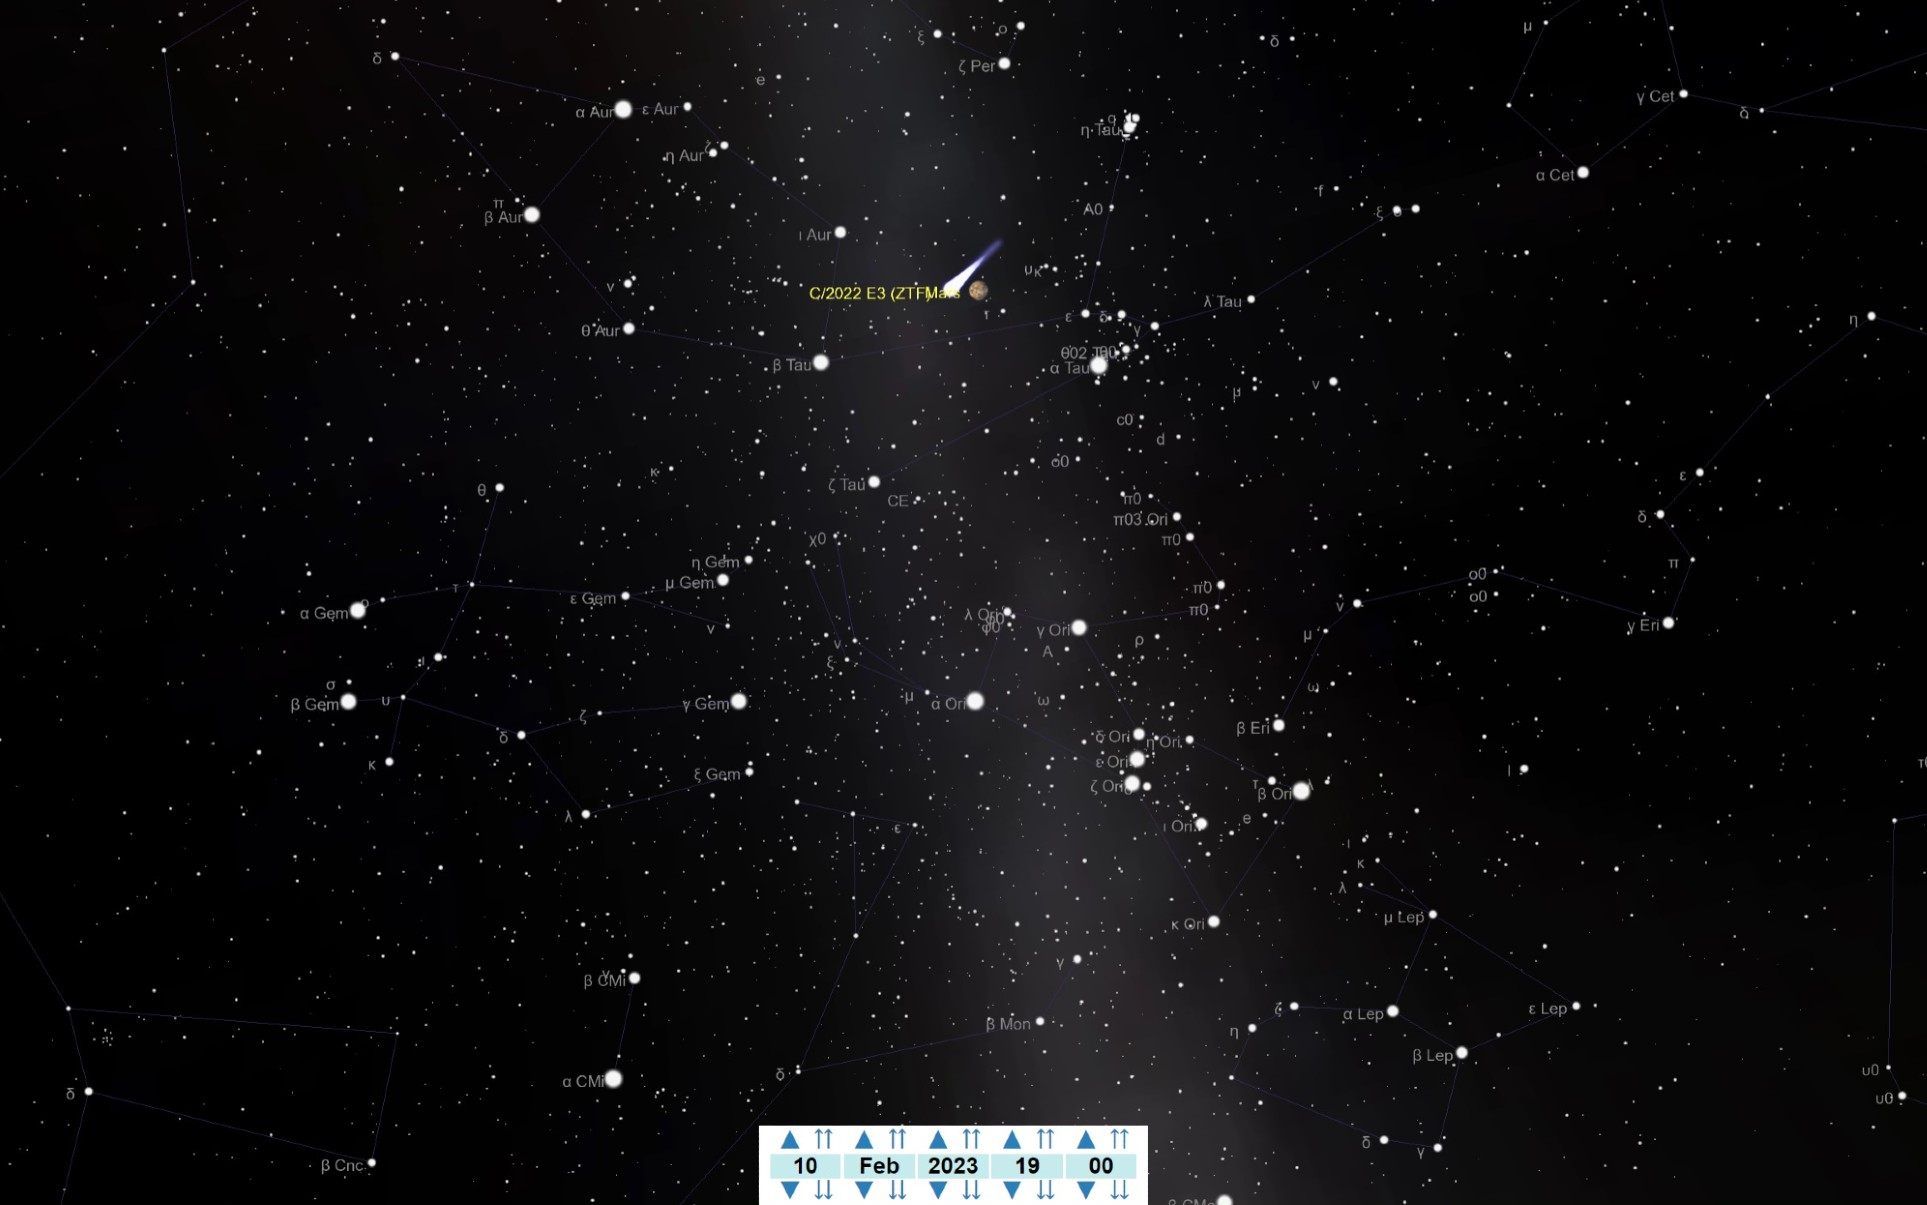 An illustration of the night sky on February 10, showing the position of Comet C/2022 E3 (ZTF) near Mars.